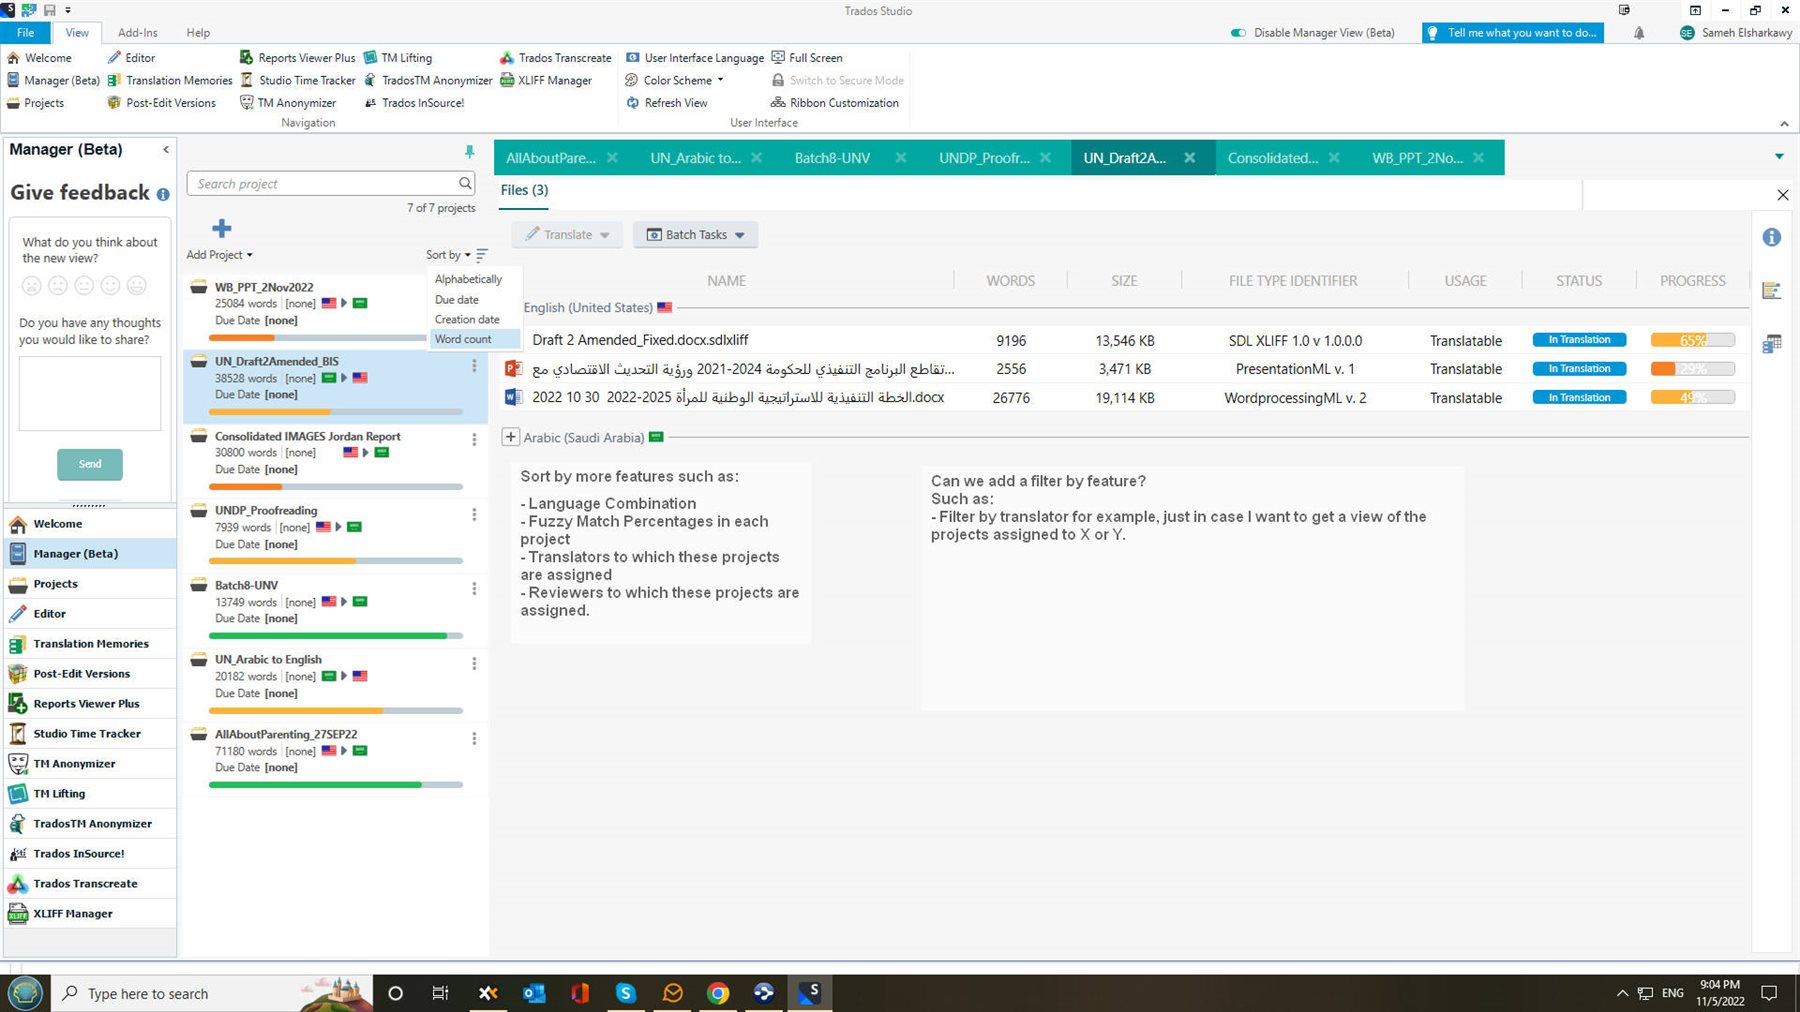 Trados Studio Manager view with a feedback pop-up, project list, and file details including translation progress bars.